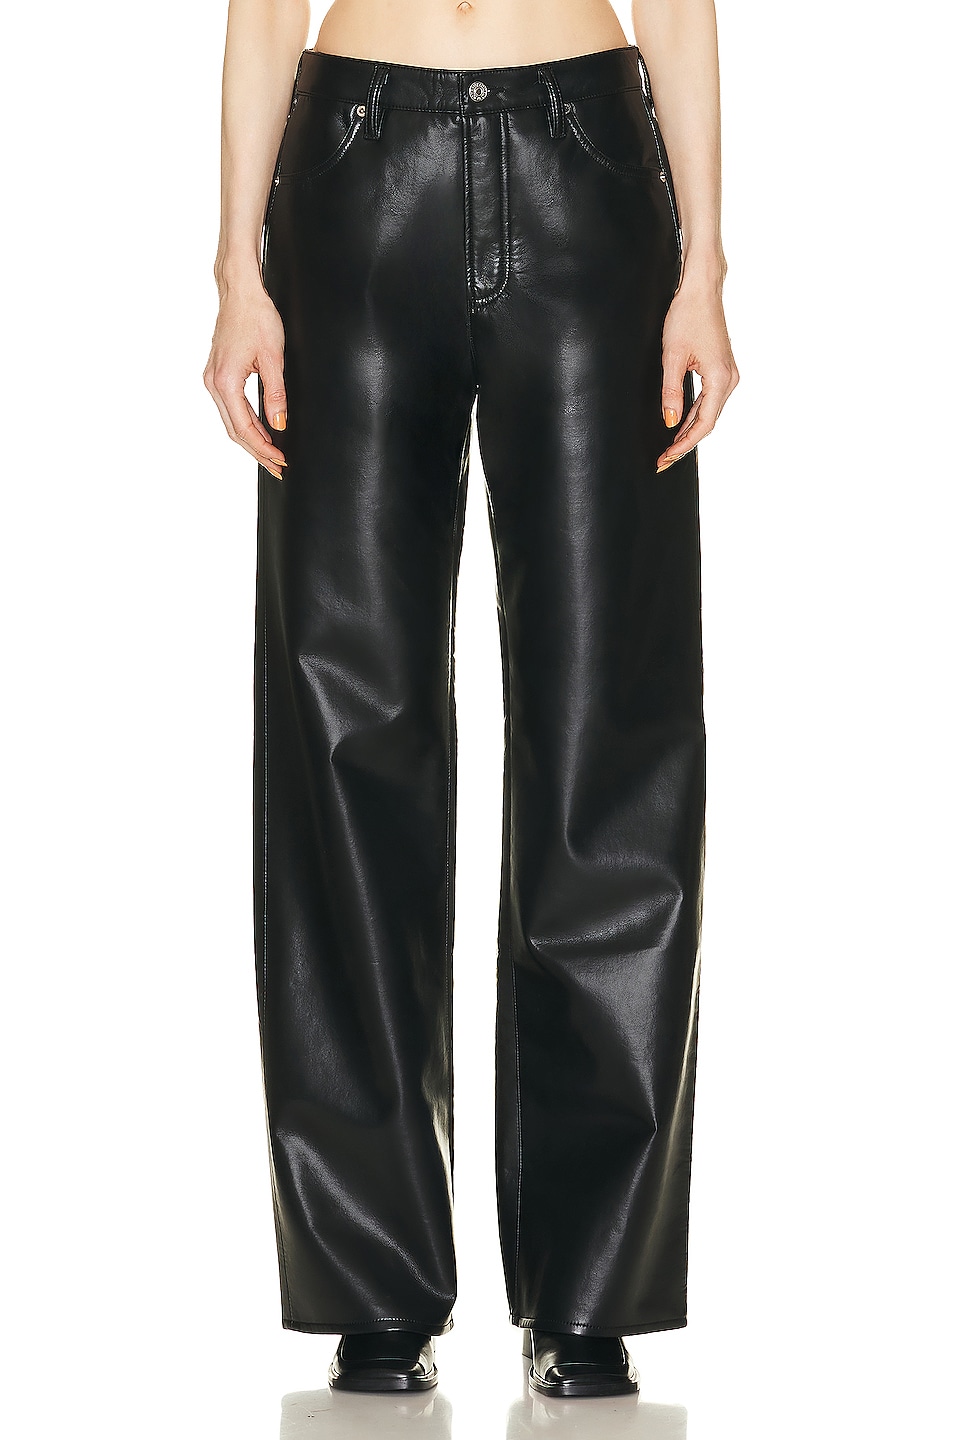 Citizens of Humanity Leather Annina Trouser in Black | FWRD